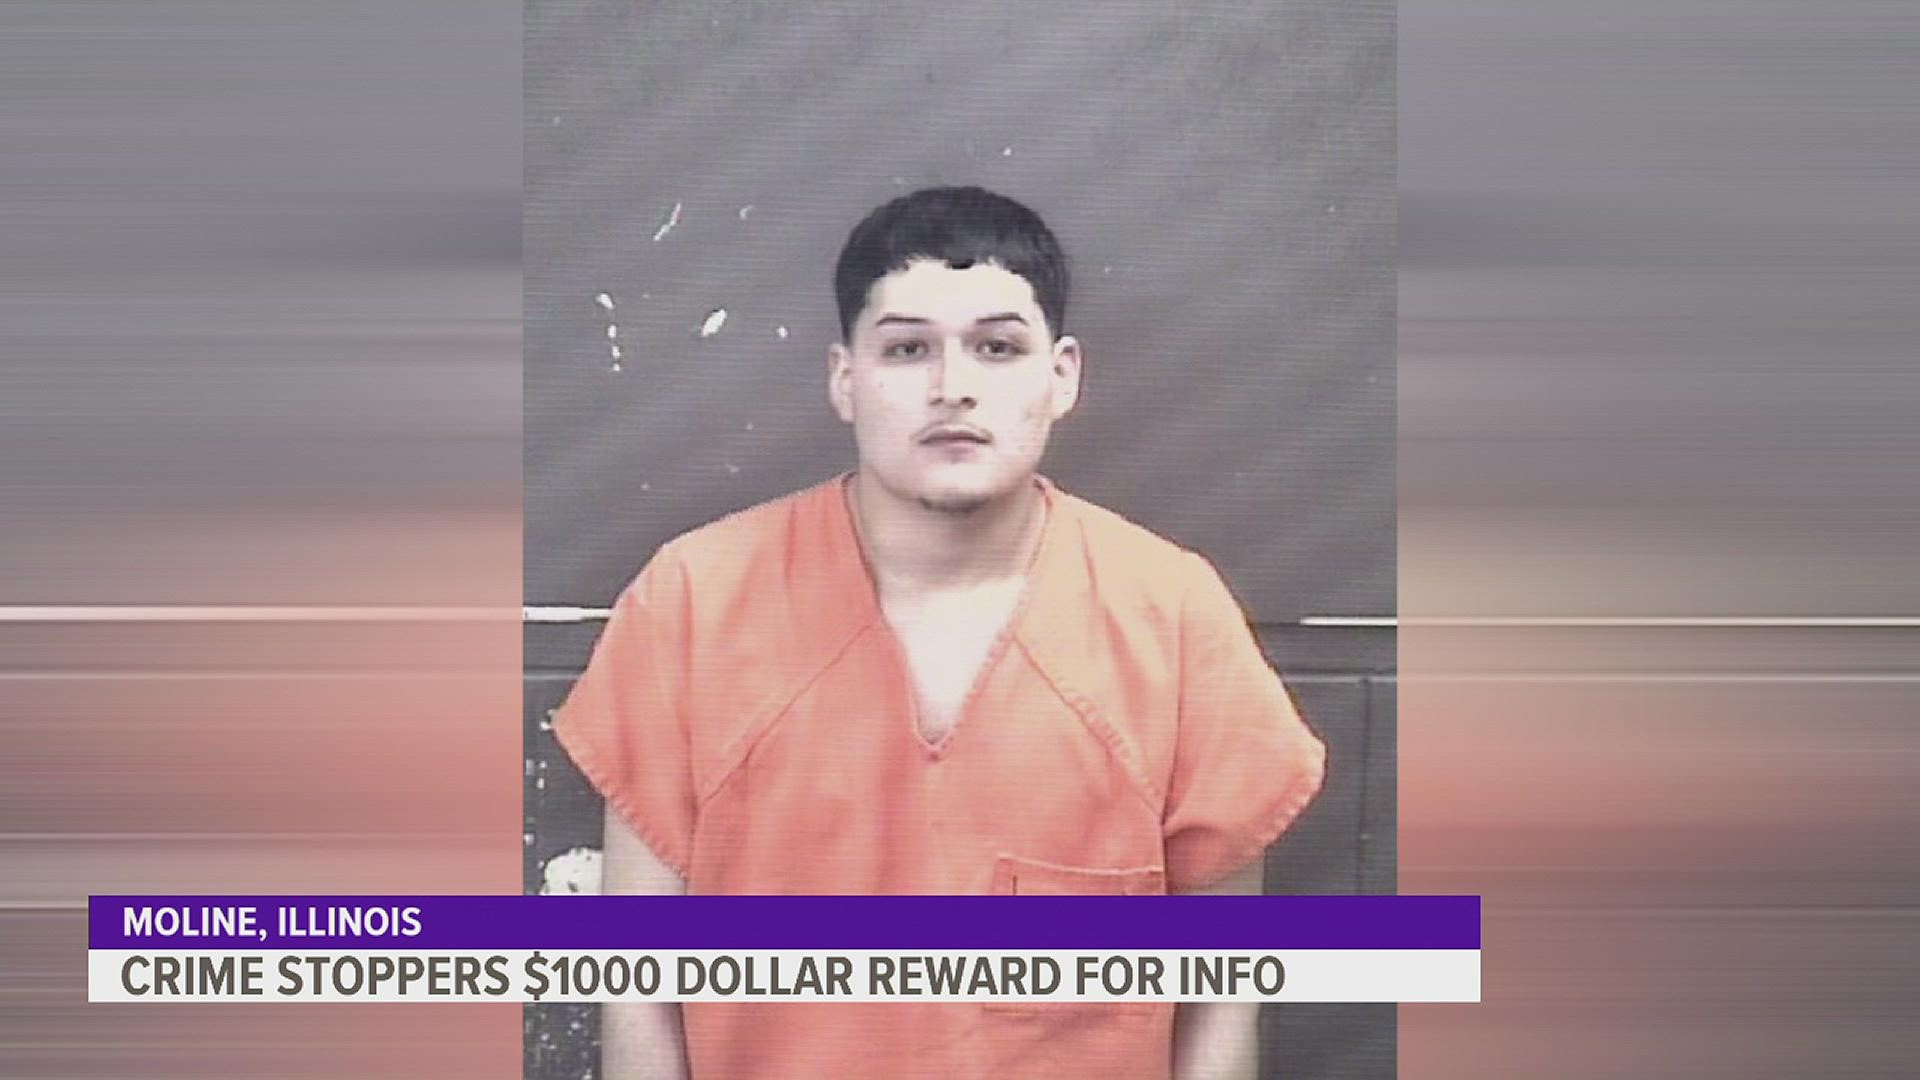 An arrest warrant has been issued for 23-year-old Edgar Alonzo-Rosales of Moline; he is wanted for attempted murder after fleeing from a shooting.